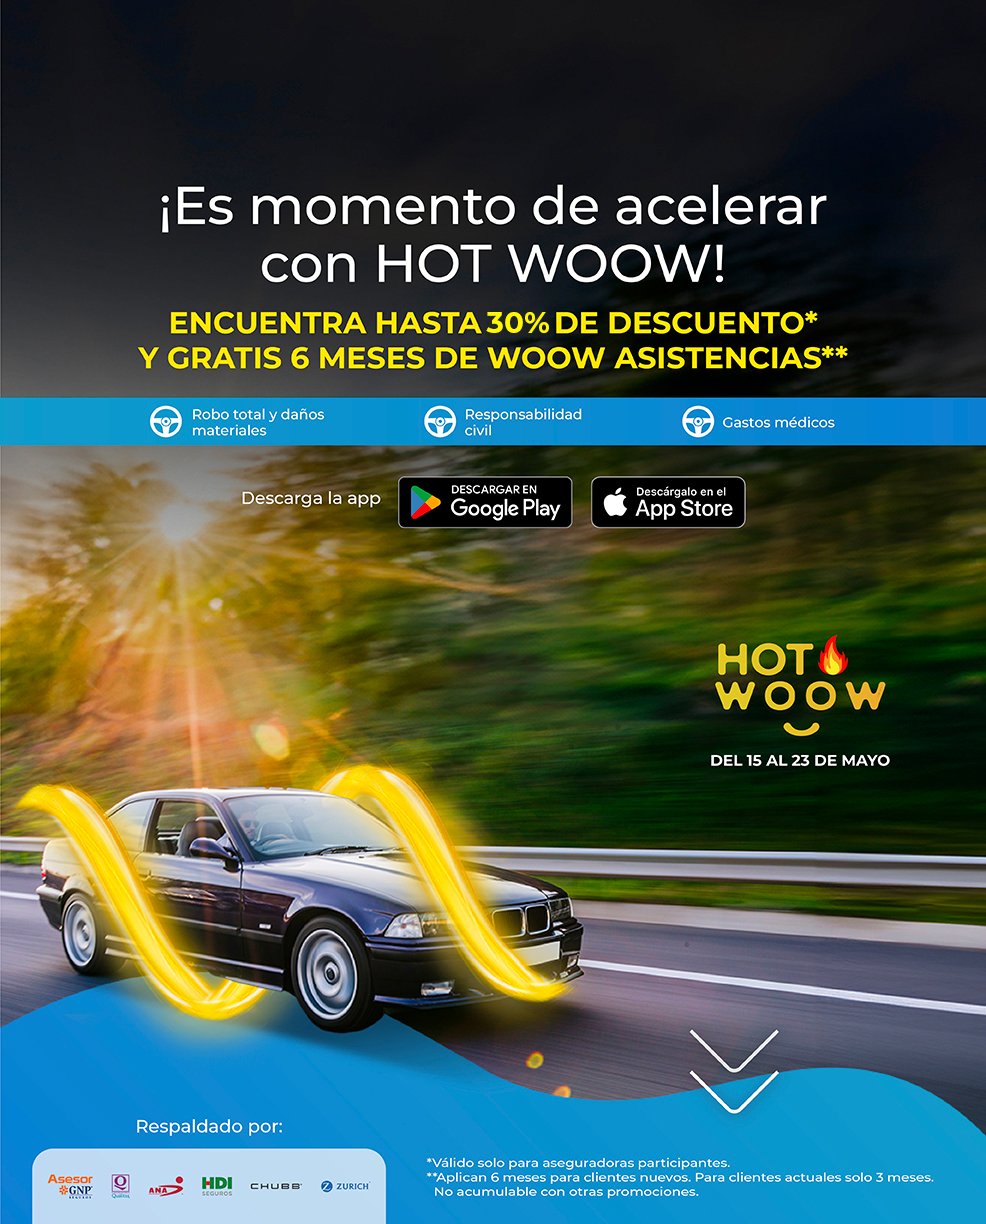 woow-hotwoow_24-hero-mobile-11_auto_gral-landing